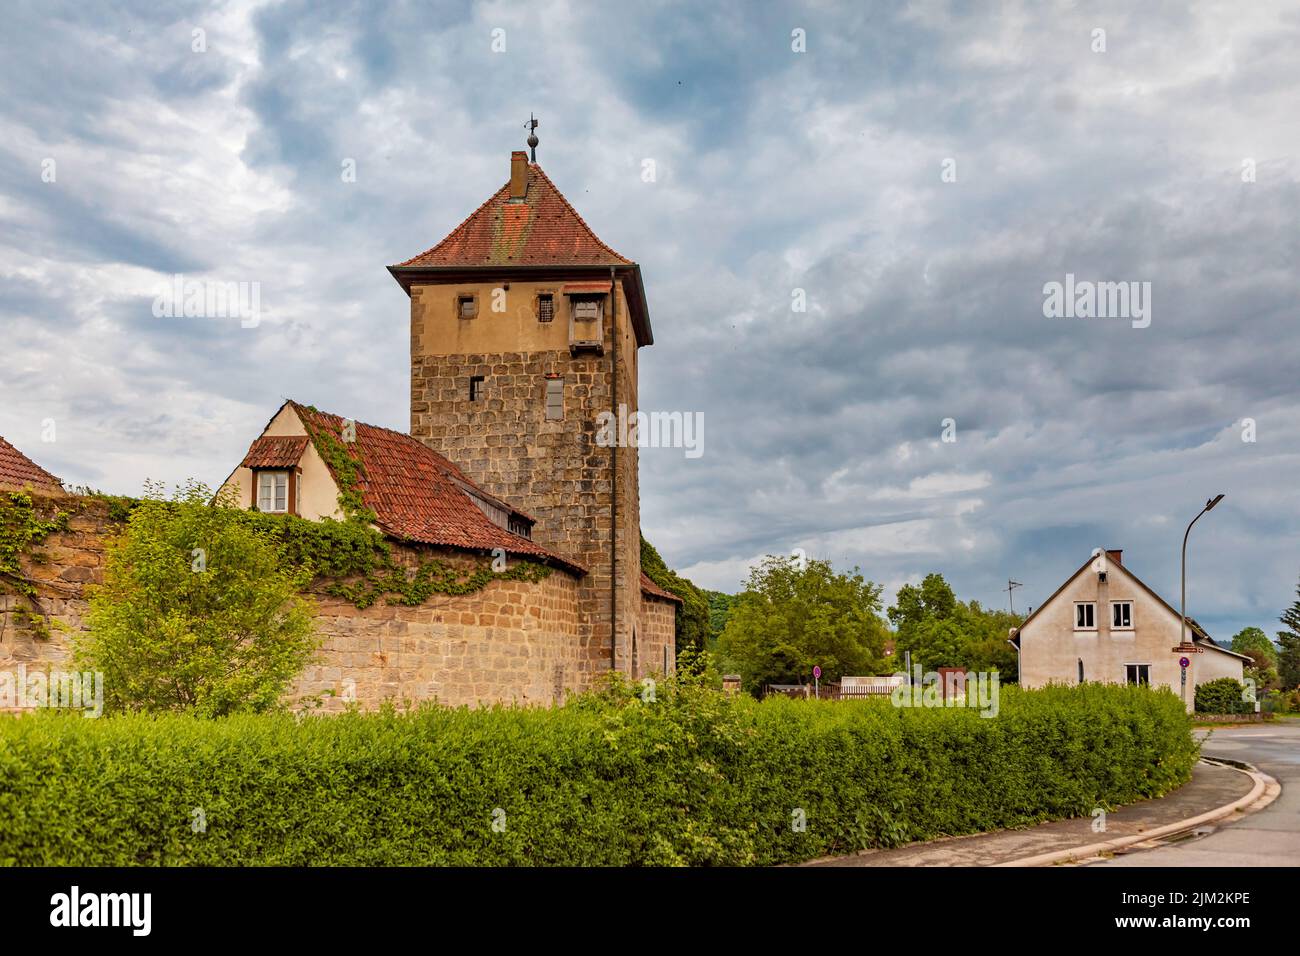 SESSLACH, BAVARIA, GERMANY - CIRCA MAY, 2022: The Cityscape of Sesslach town, Germany. Stock Photo